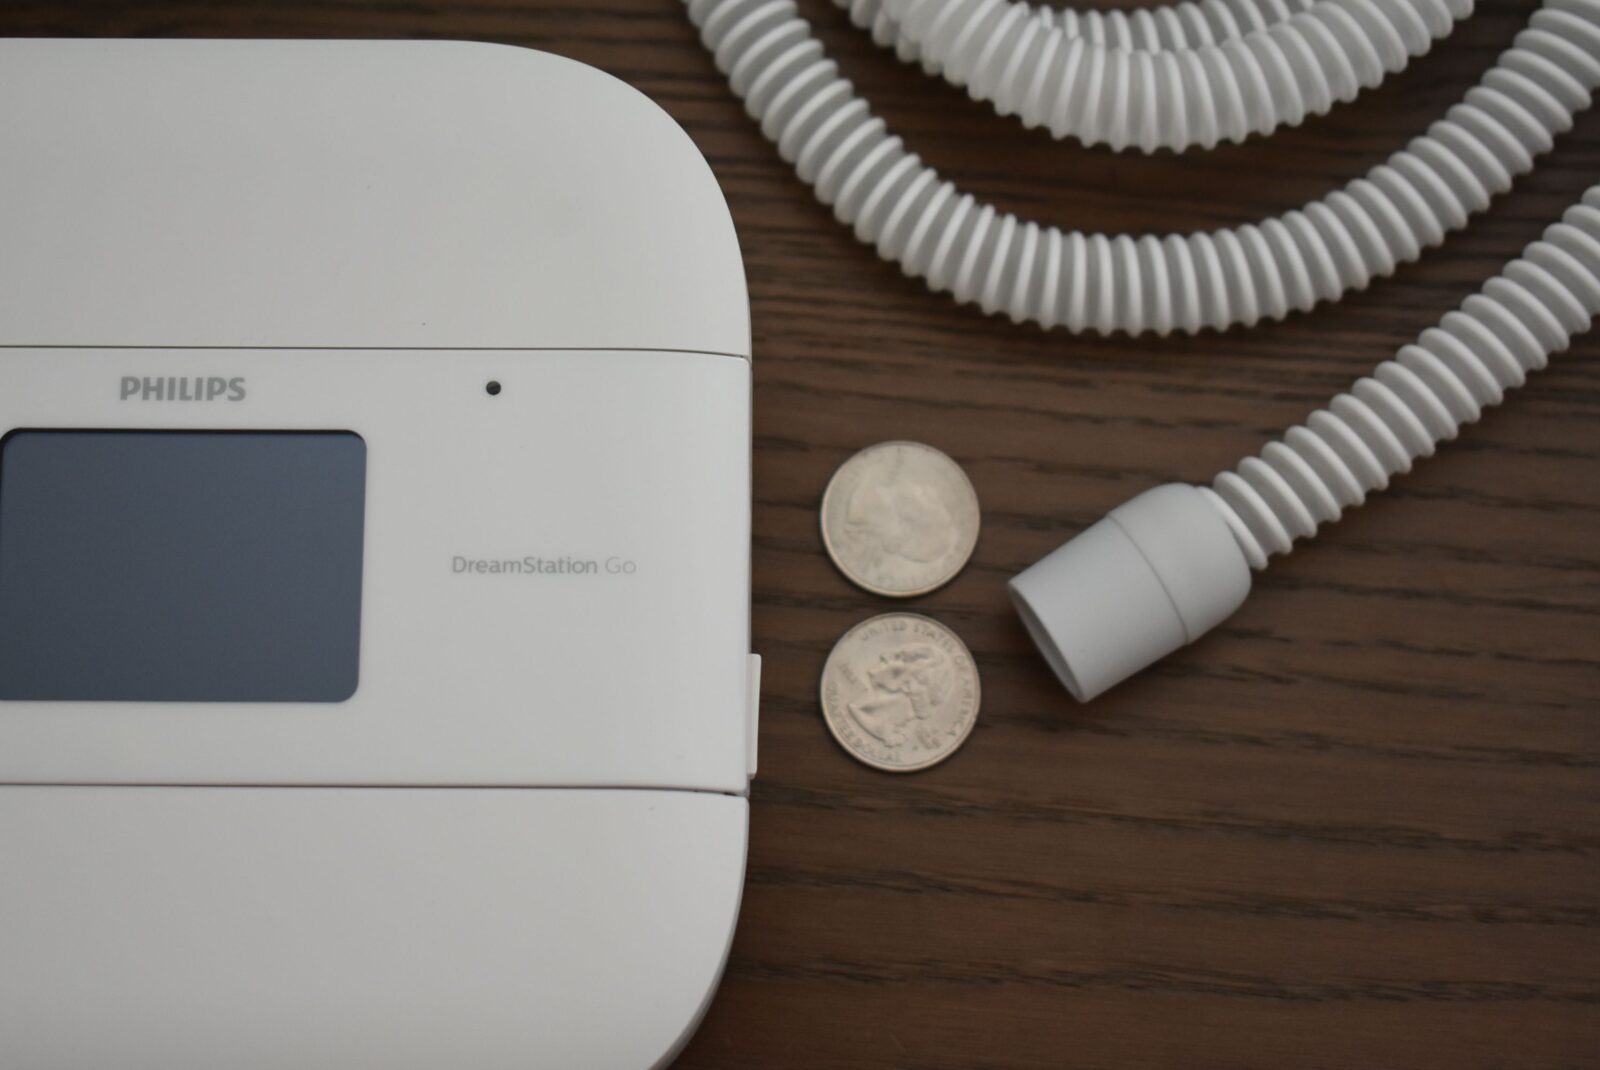 This info on CPAP machines will help you buy smartly